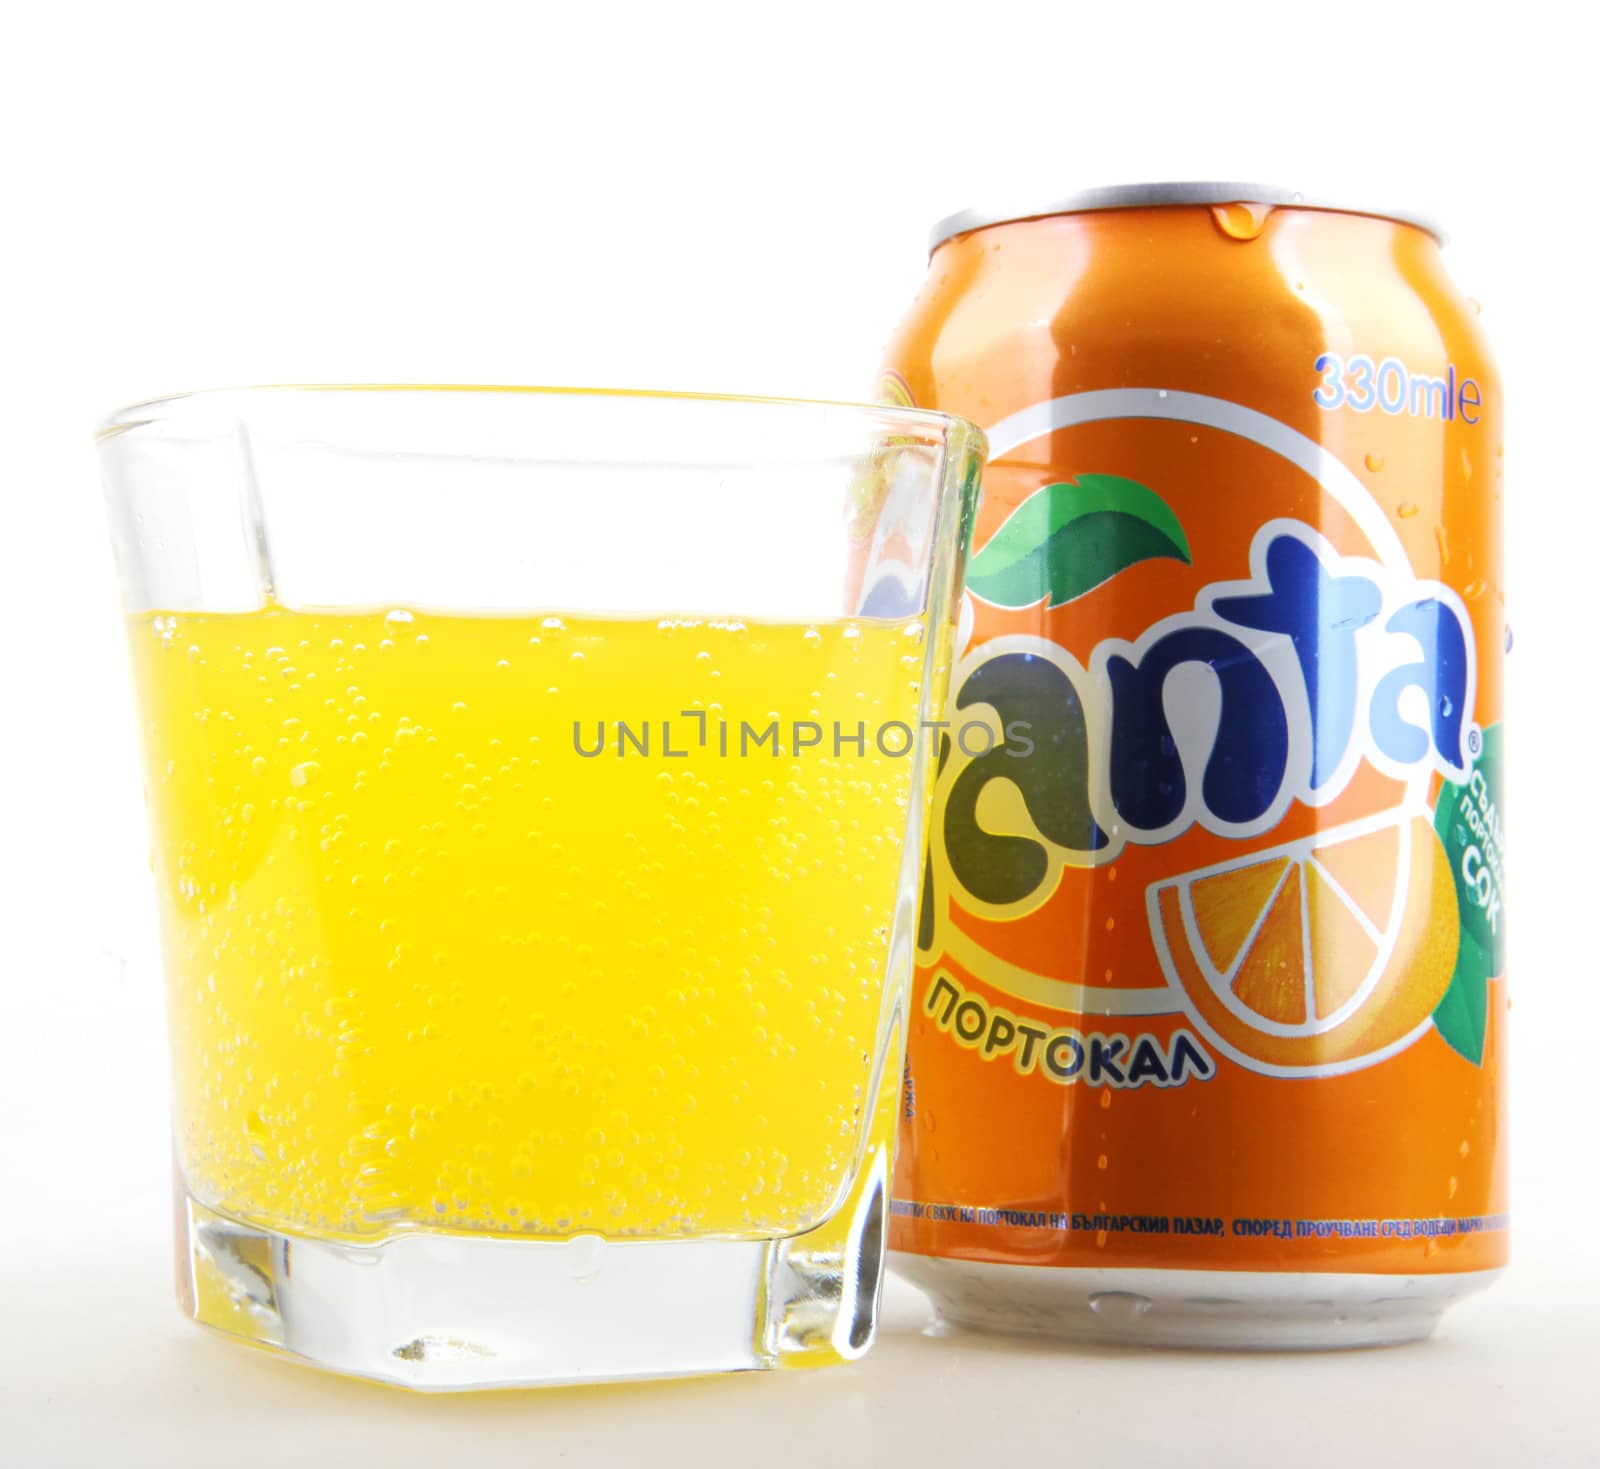 AYTOS, BULGARIA - JANUARY 25, 2014: Fanta bottle can isolated on white background. Fanta is a carbonated soft drink sold in stores, restaurants, and vending machines throughout the world.